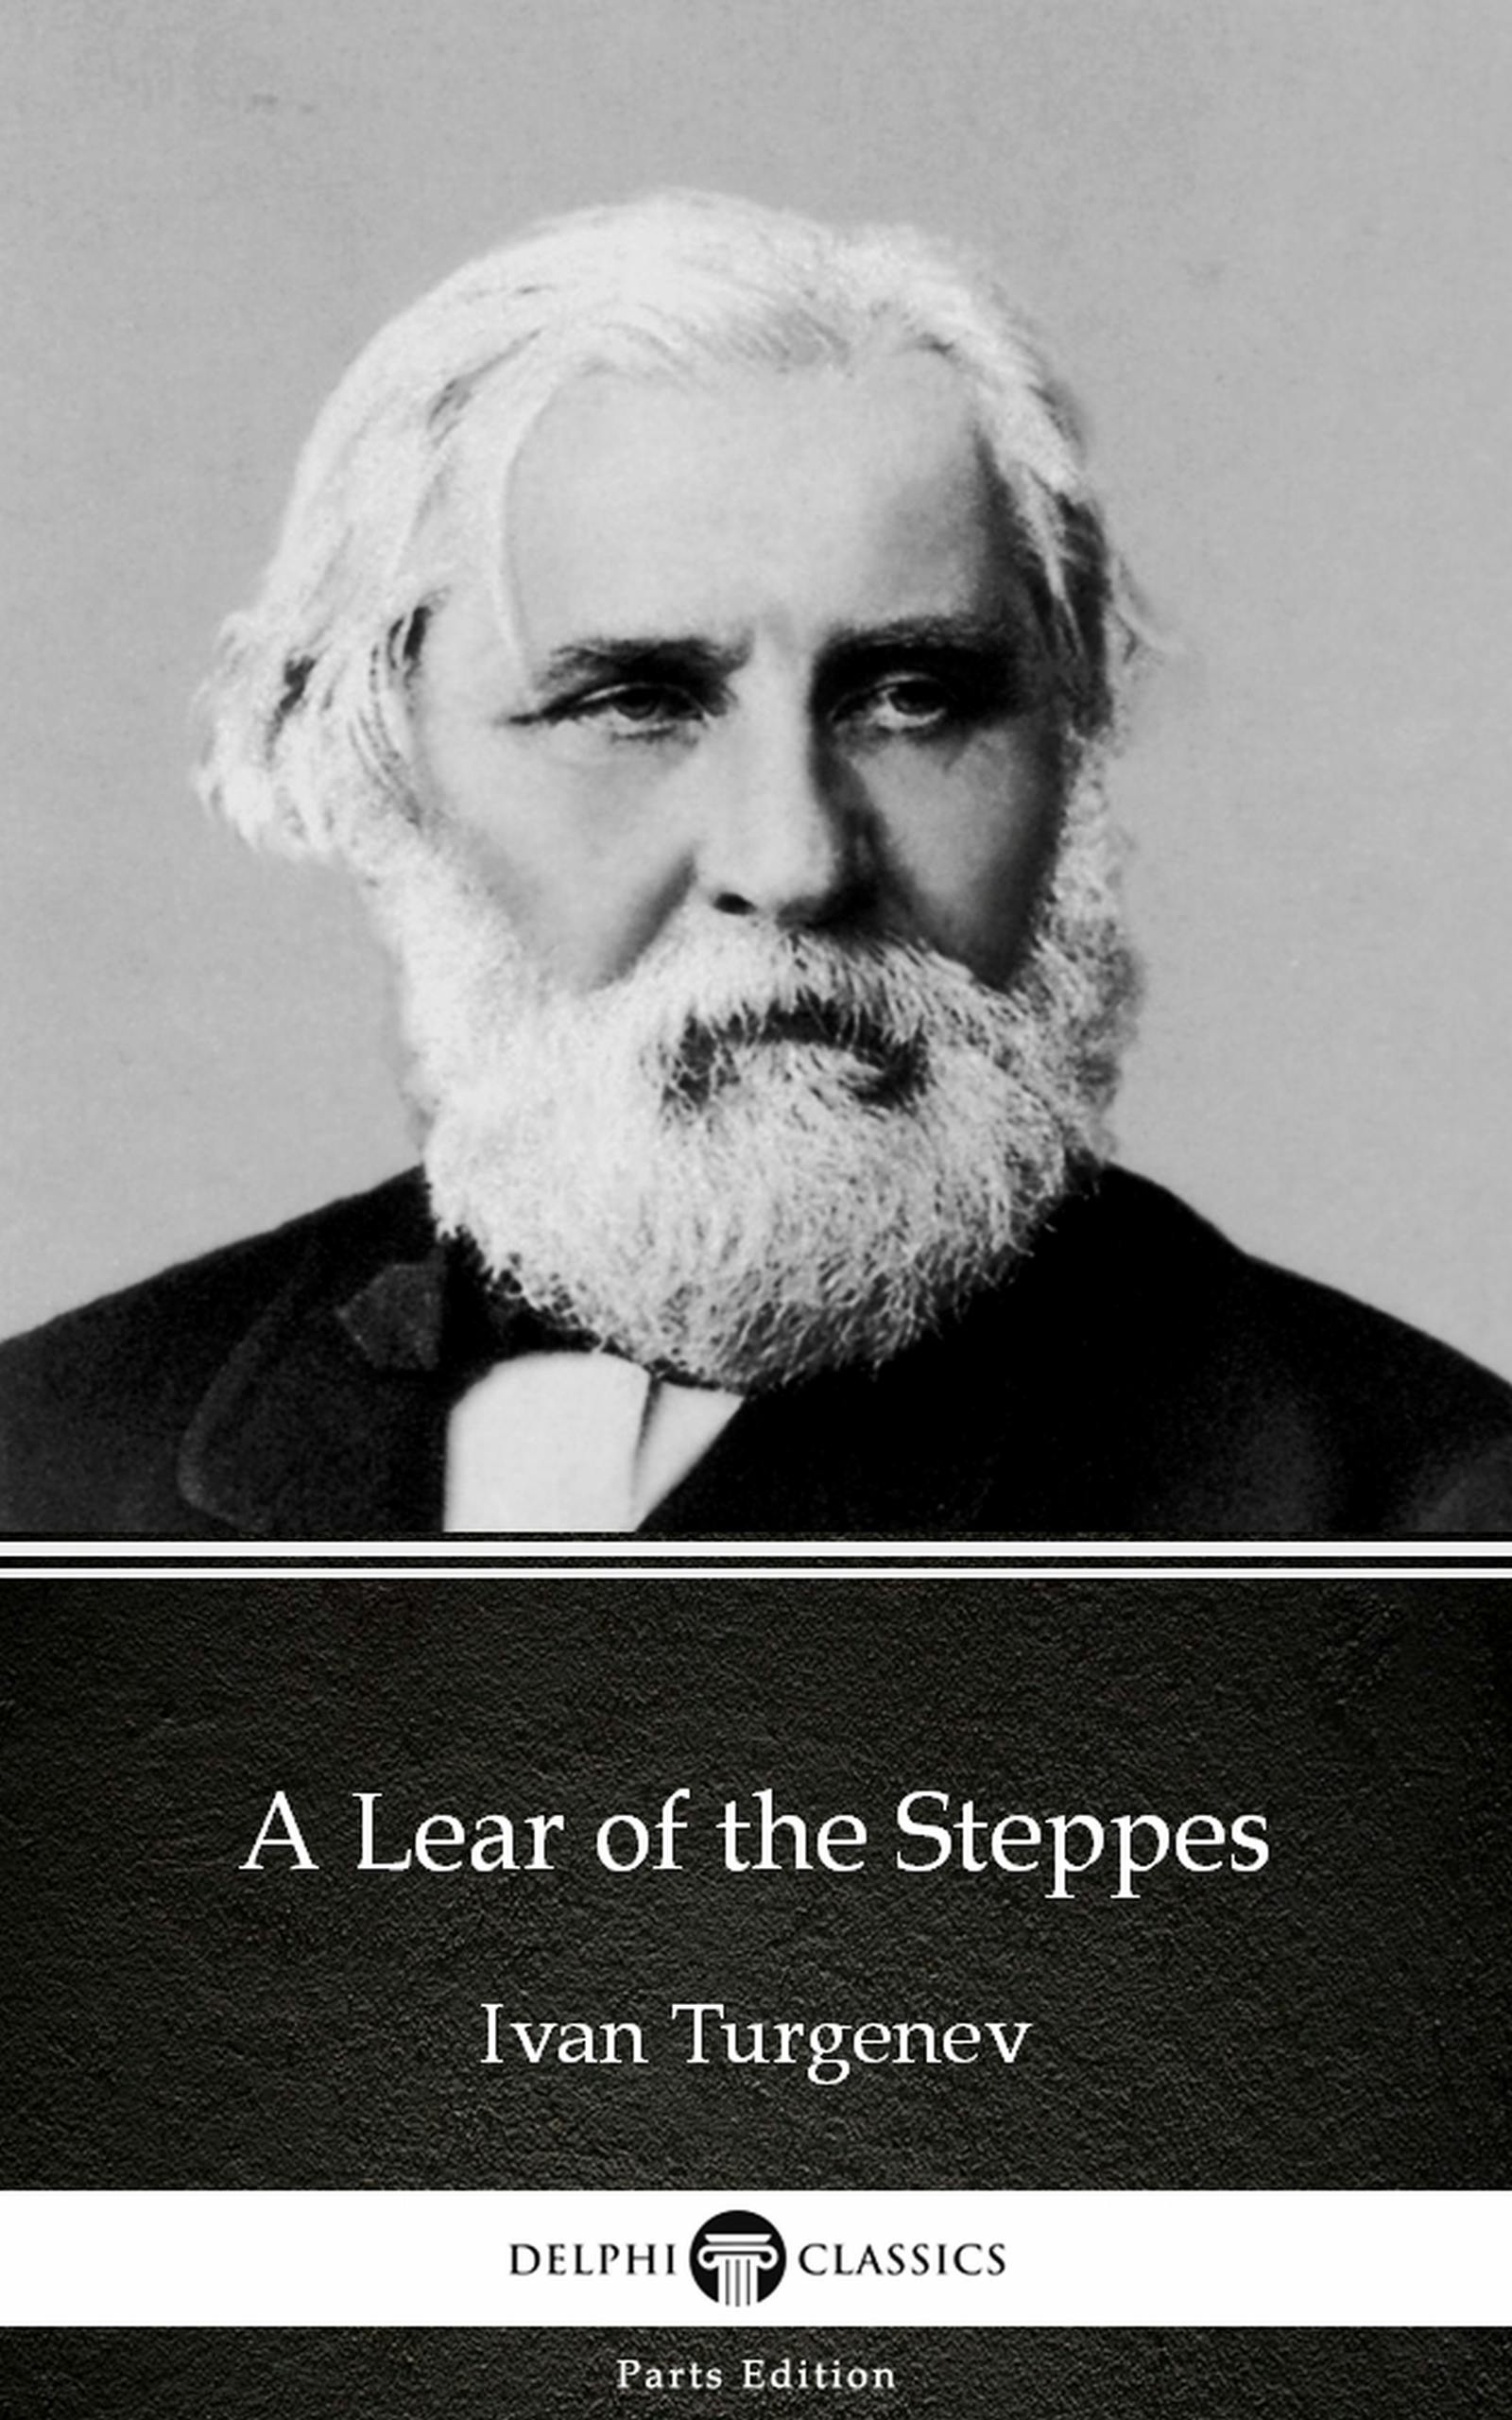 A Lear of the Steppes by Ivan Turgenev - Delphi Classics (Illustrated) - Ivan Turgenev